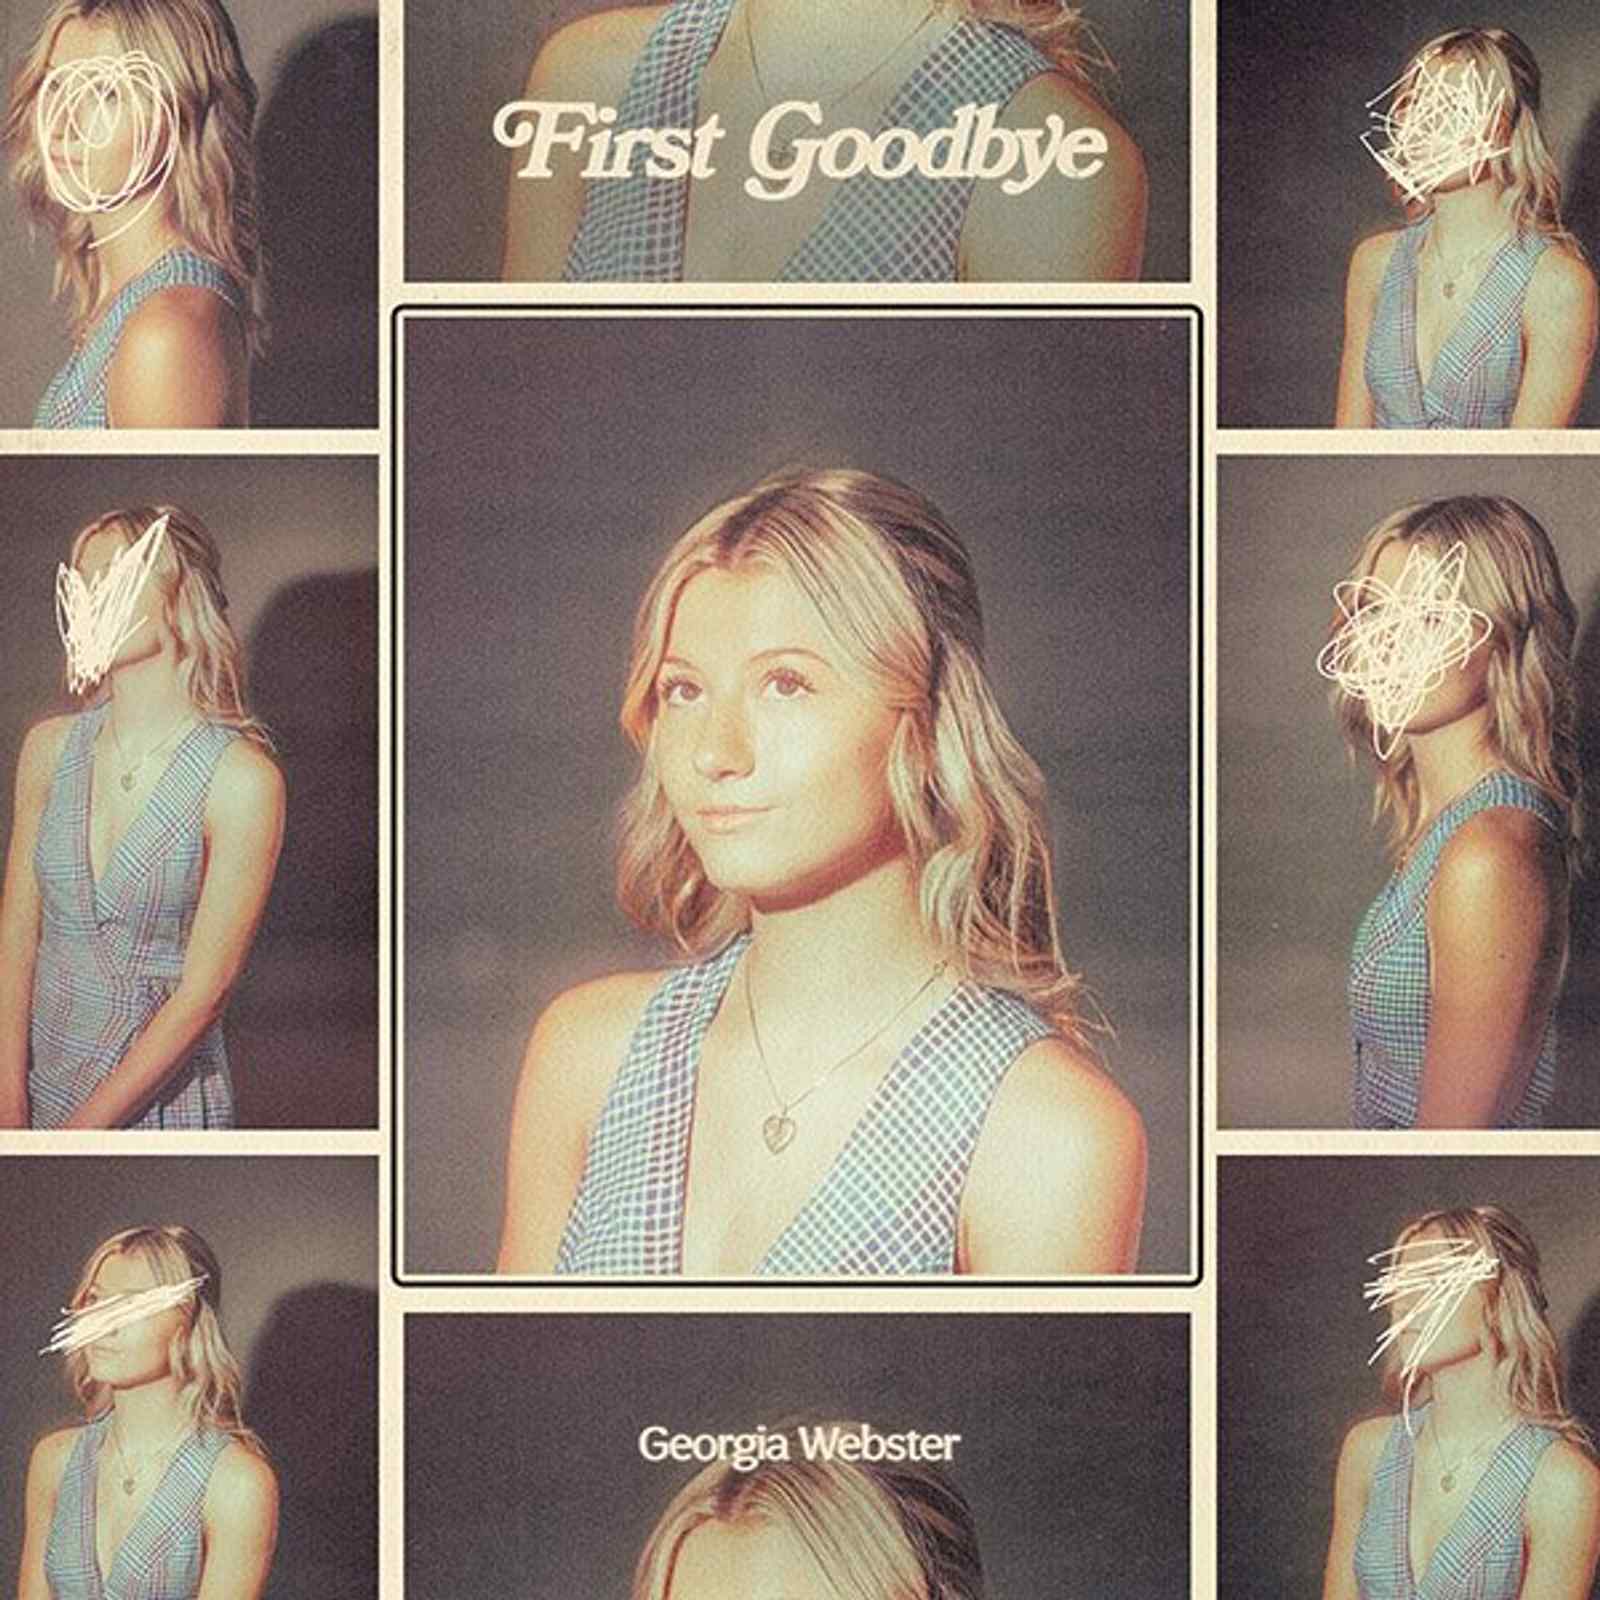 First Goodbye EP by Georgia Webster